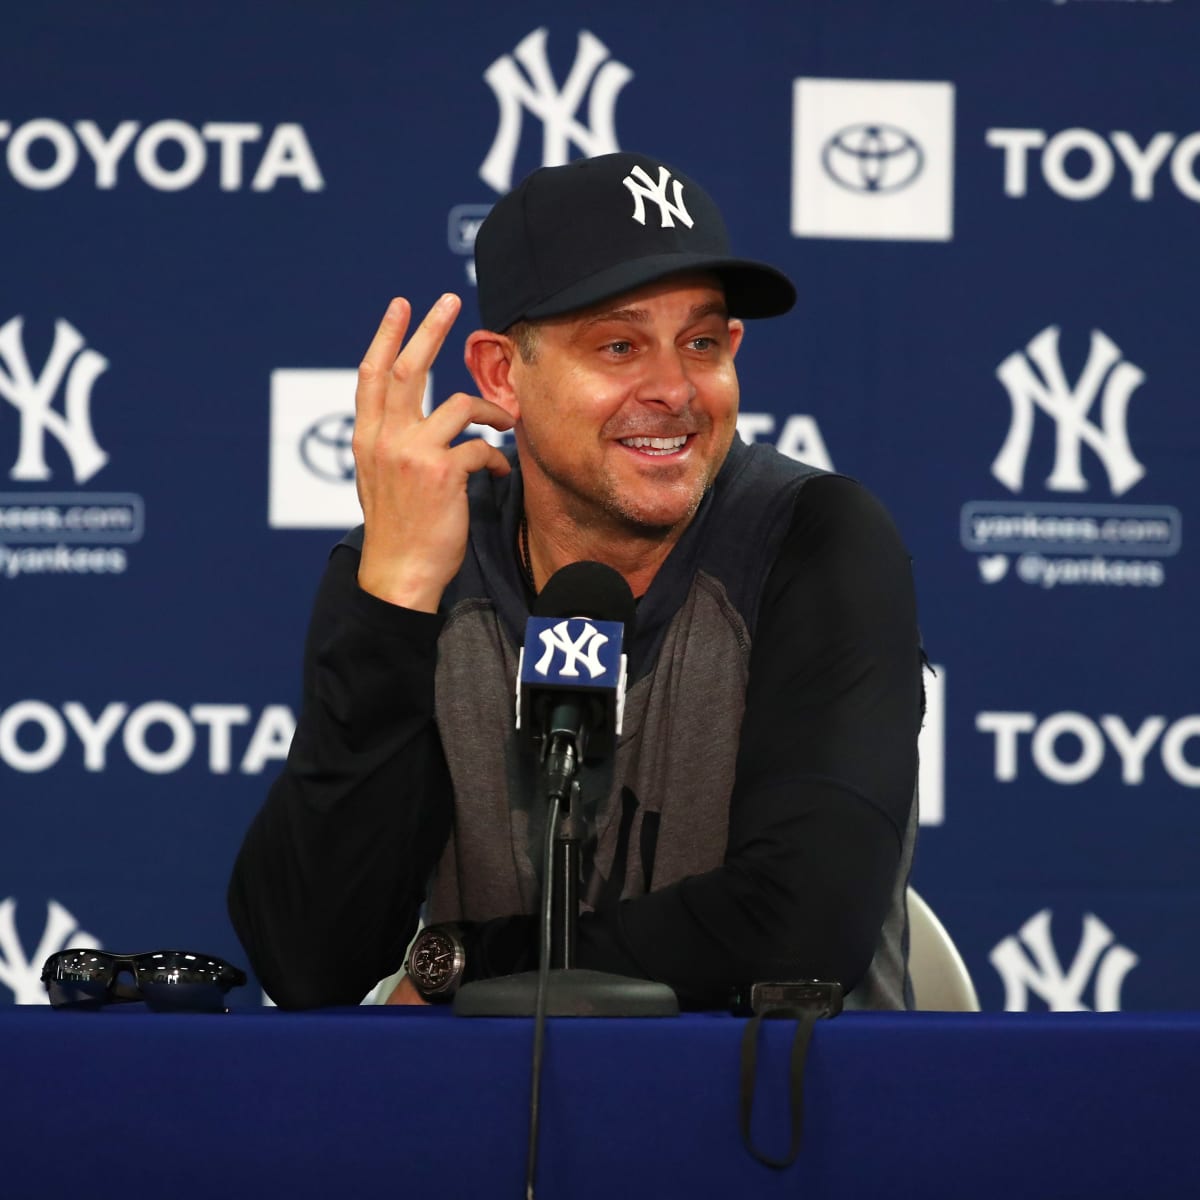 Yankees sign manager Aaron Boone to 3-year contract through 2024